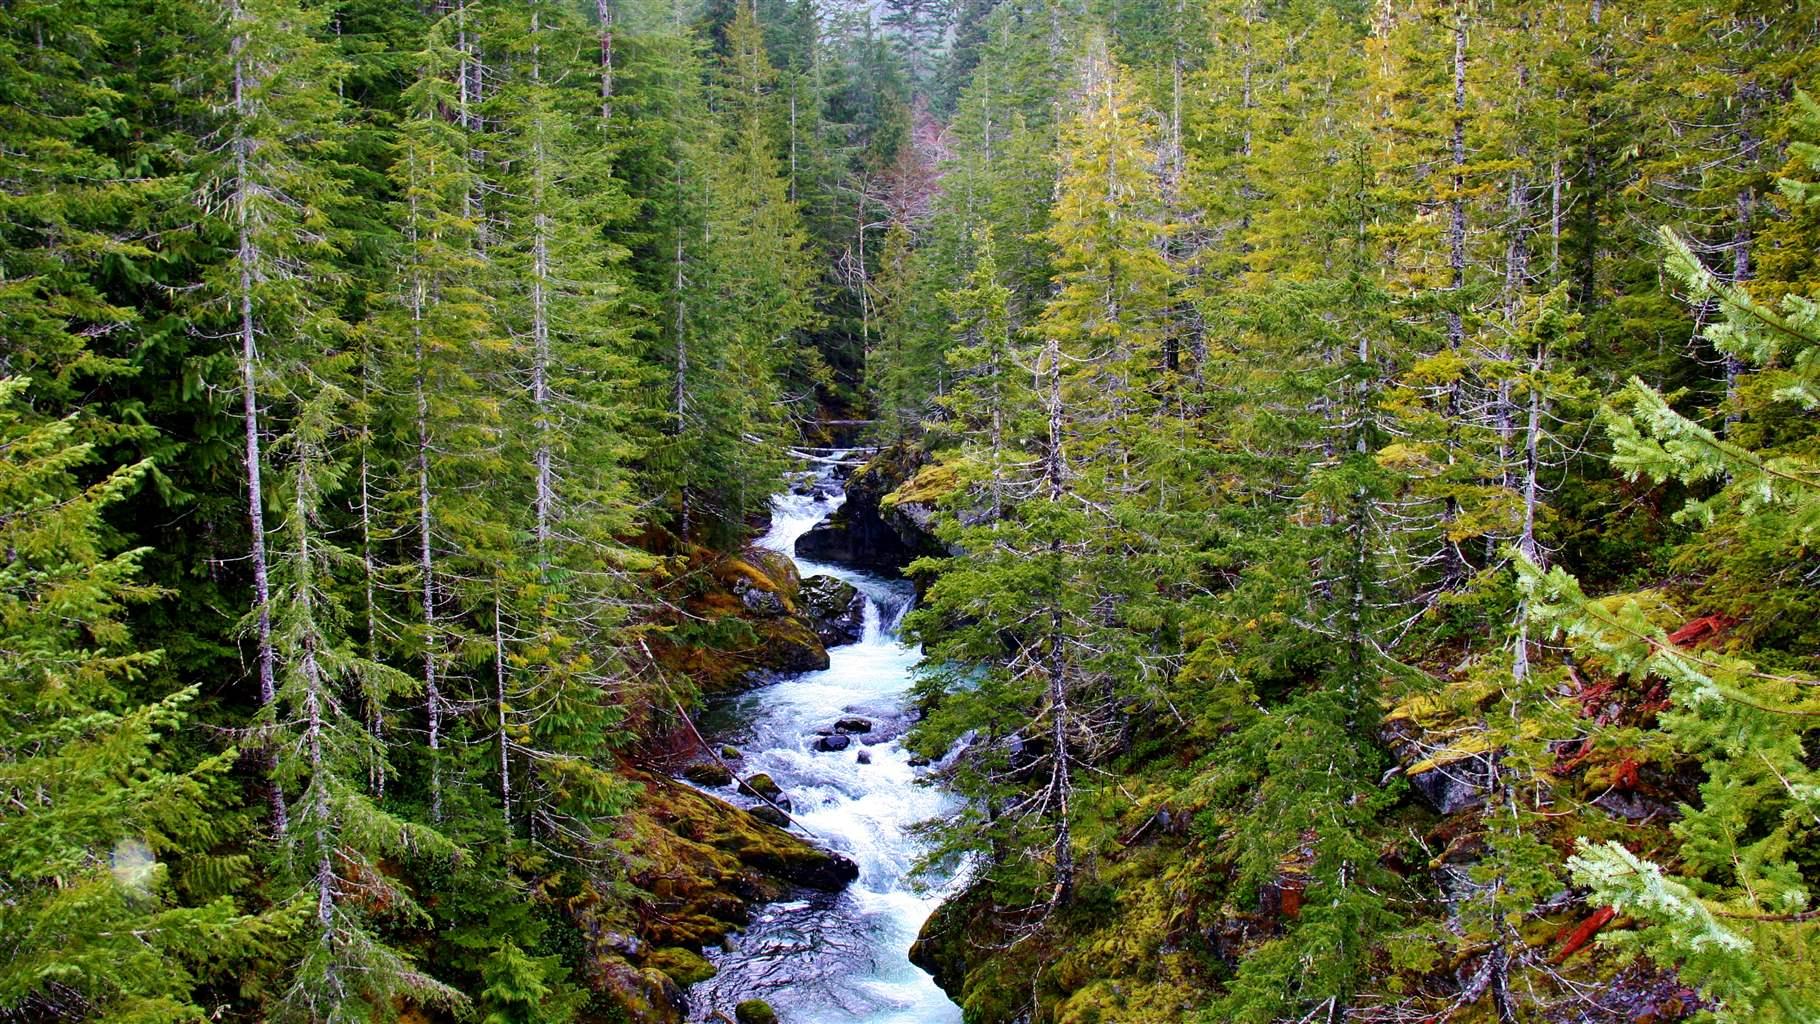 A rapid river flanked with evergreen trees and moss covered rocks.